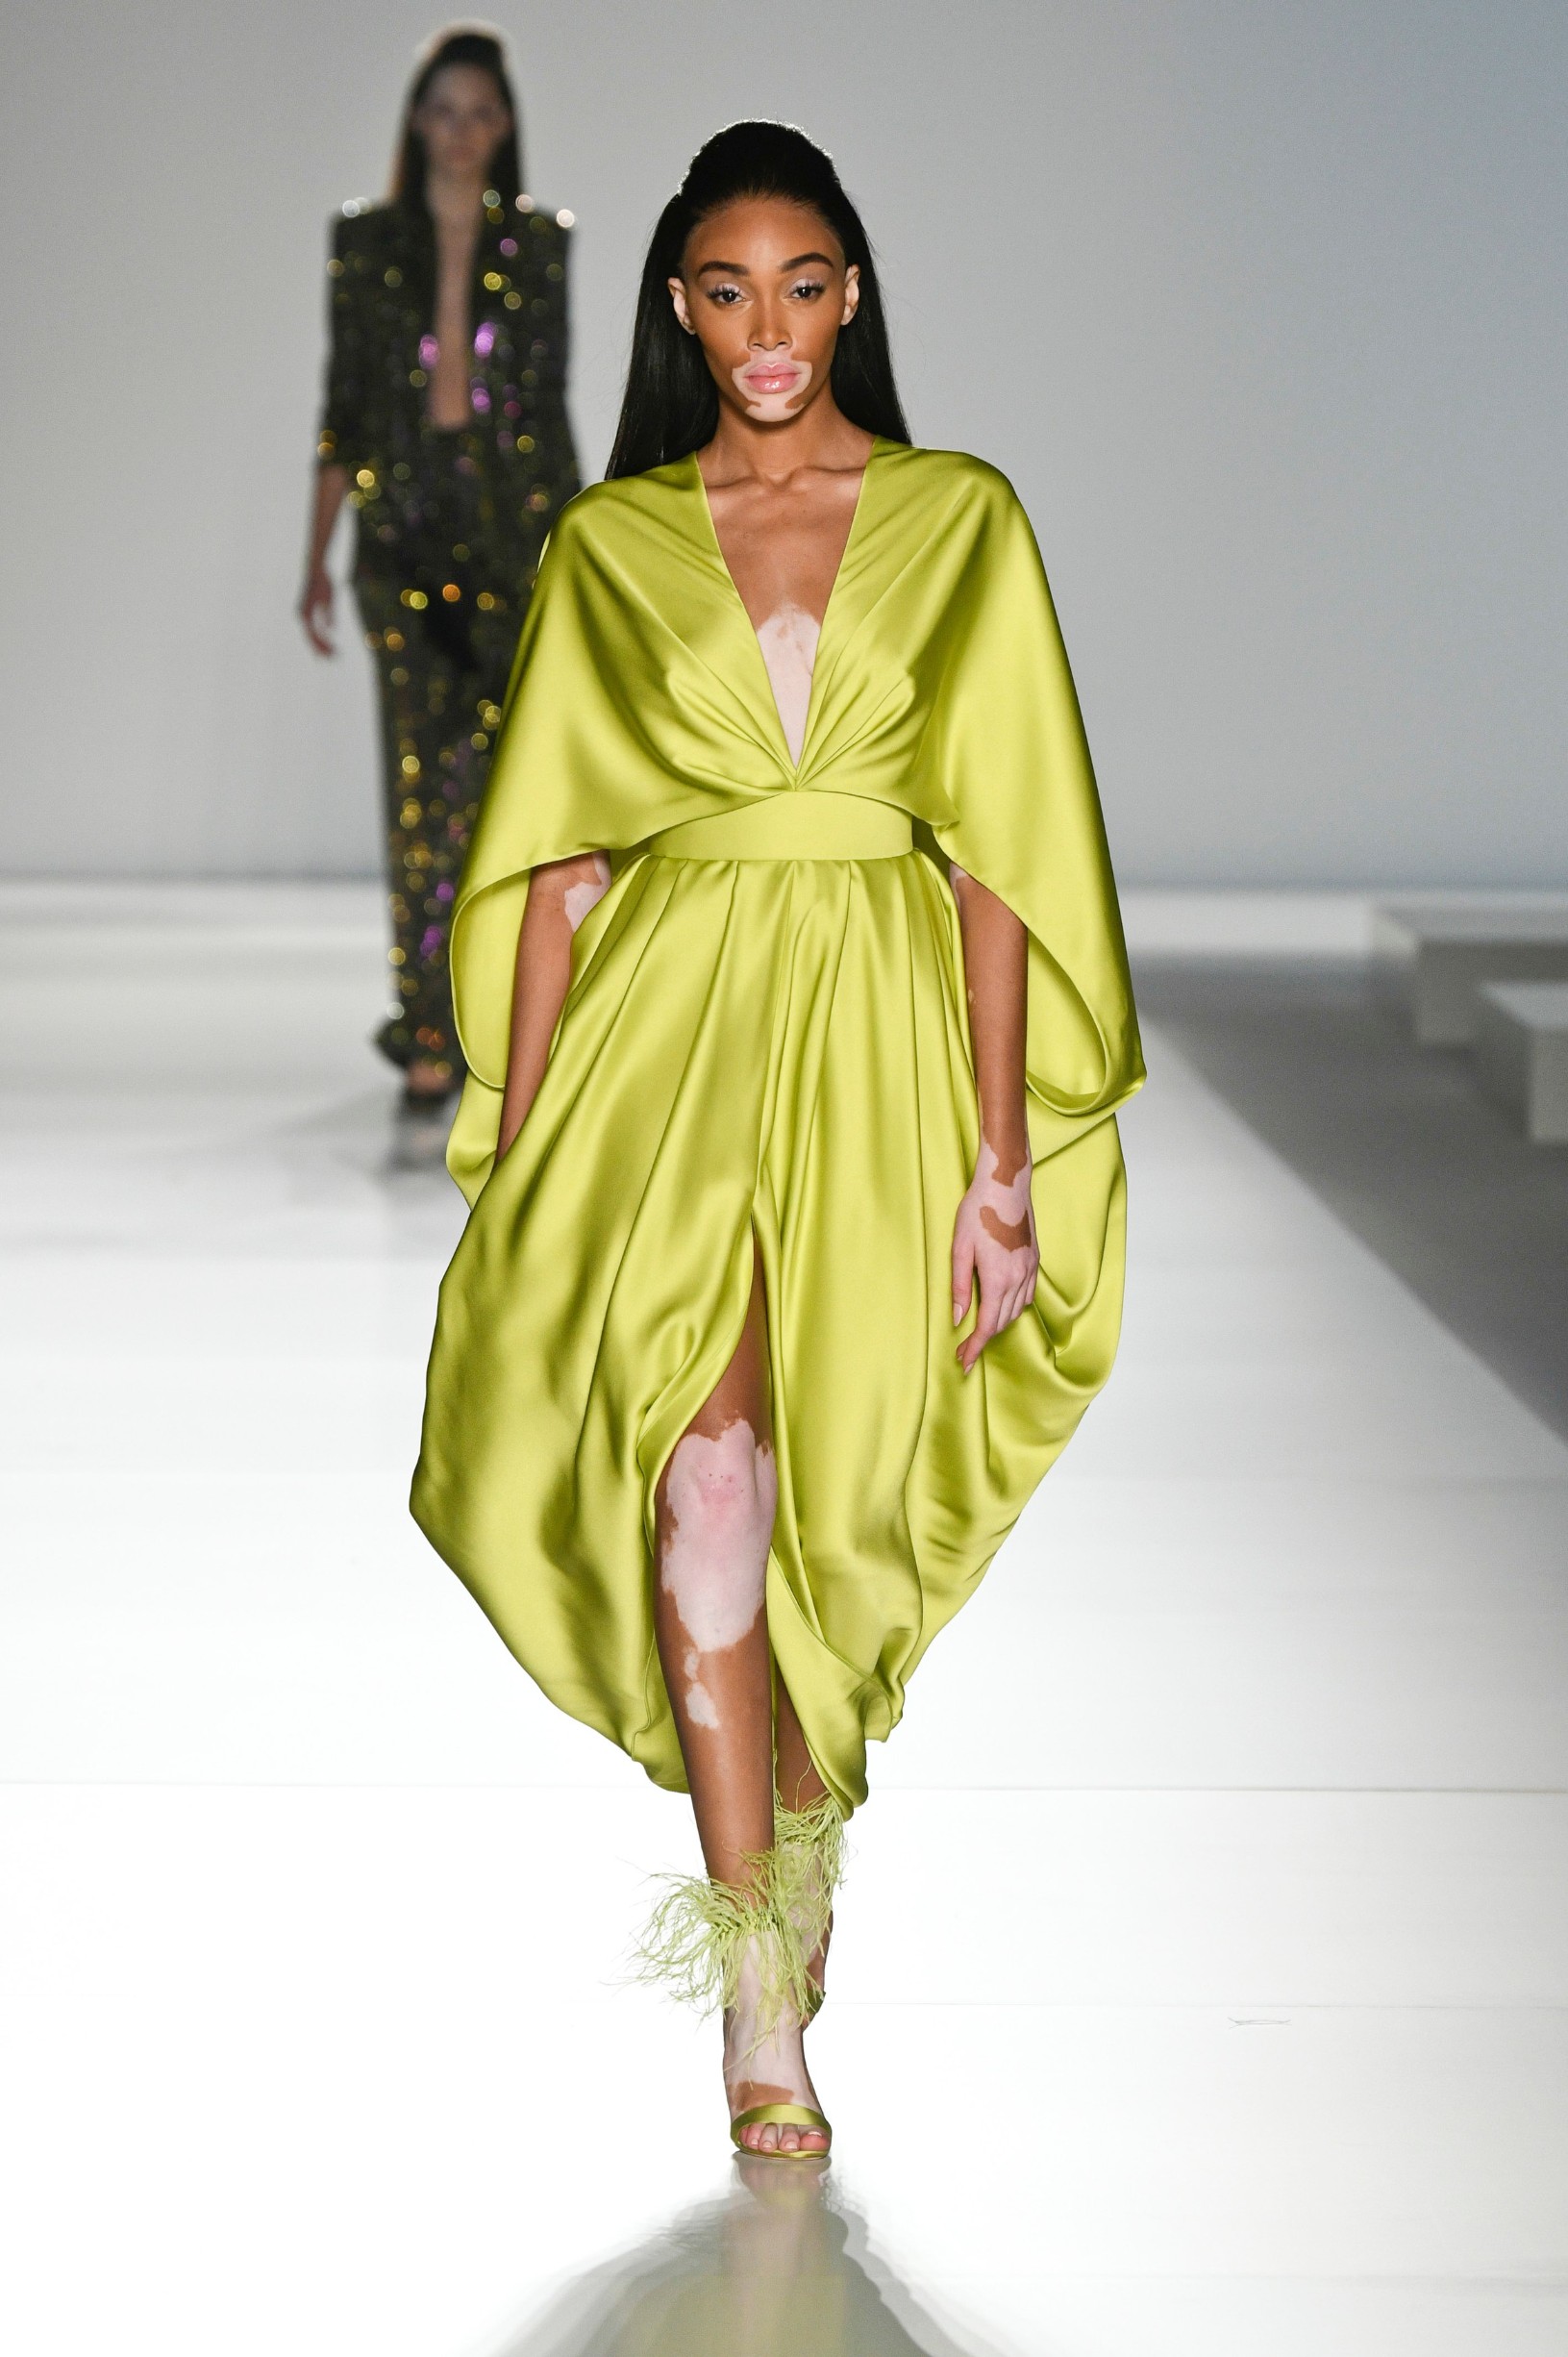 Model Winnie Harlow walks on the runway during the Ralph and Russo Haute Couture fashion show during Haute Couture Spring Summer 2020 in Paris, France on January 20, 2020., Image: 494014003, License: Rights-managed, Restrictions: *** World Rights ***, Model Release: no, Credit line: Jonas Gustavsson / ddp USA / Profimedia